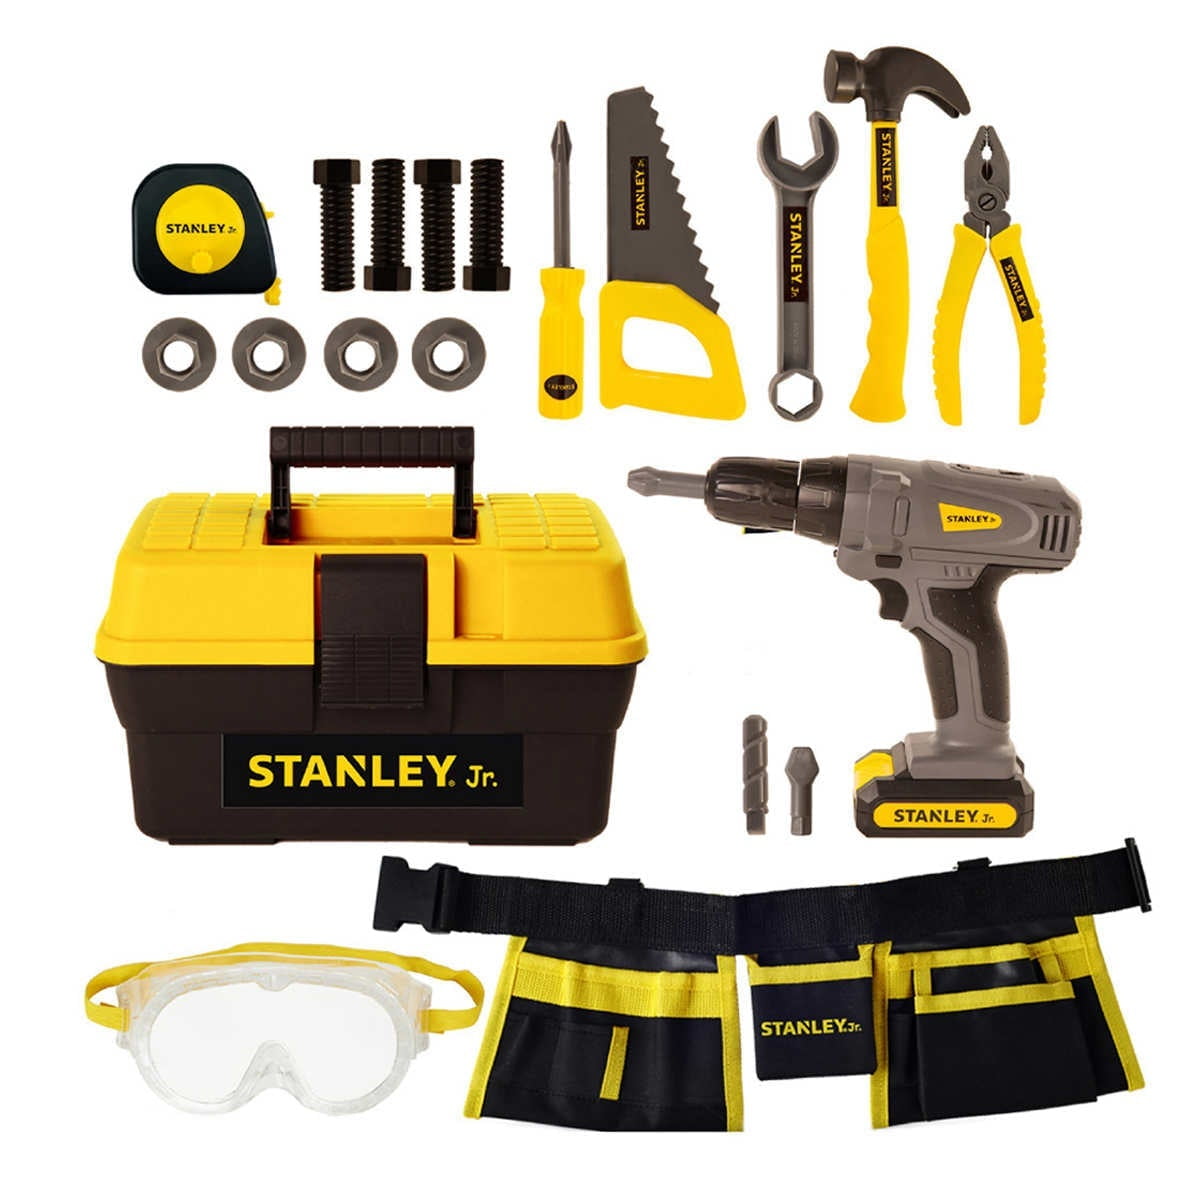 NEW IN BOX Stanley Jr Tool Circular Saw w/Light Sound Action Wood Pieces Move! 